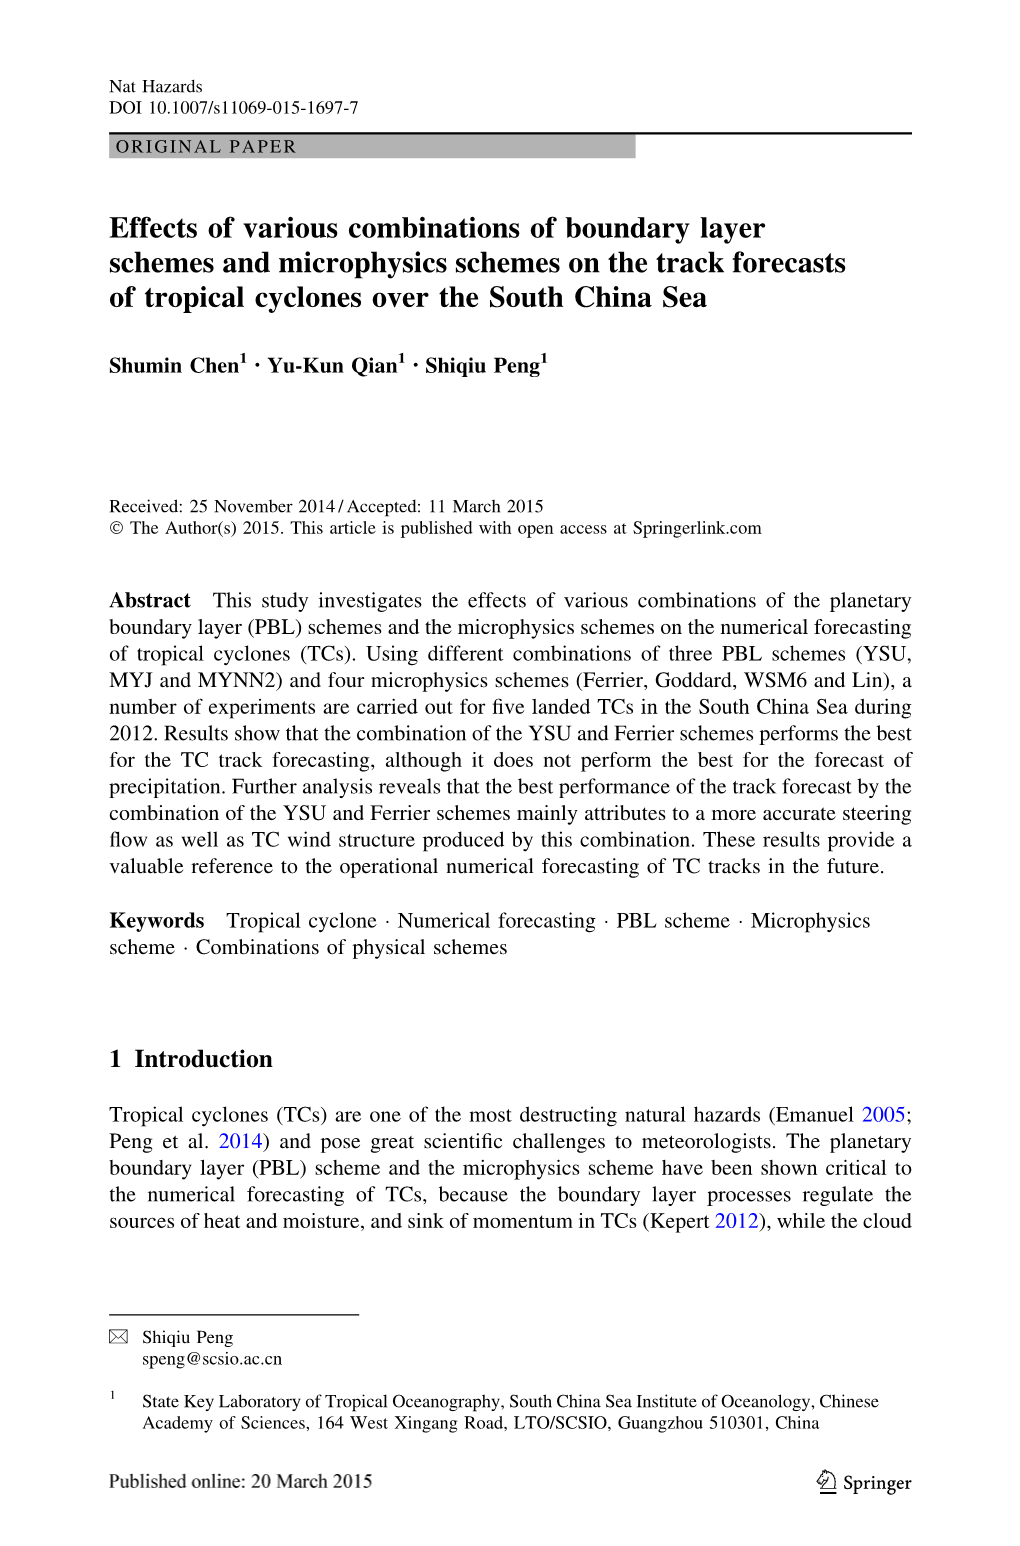 Effects of Various Combinations of Boundary Layer Schemes and Microphysics Schemes on the Track Forecasts of Tropical Cyclones Over the South China Sea